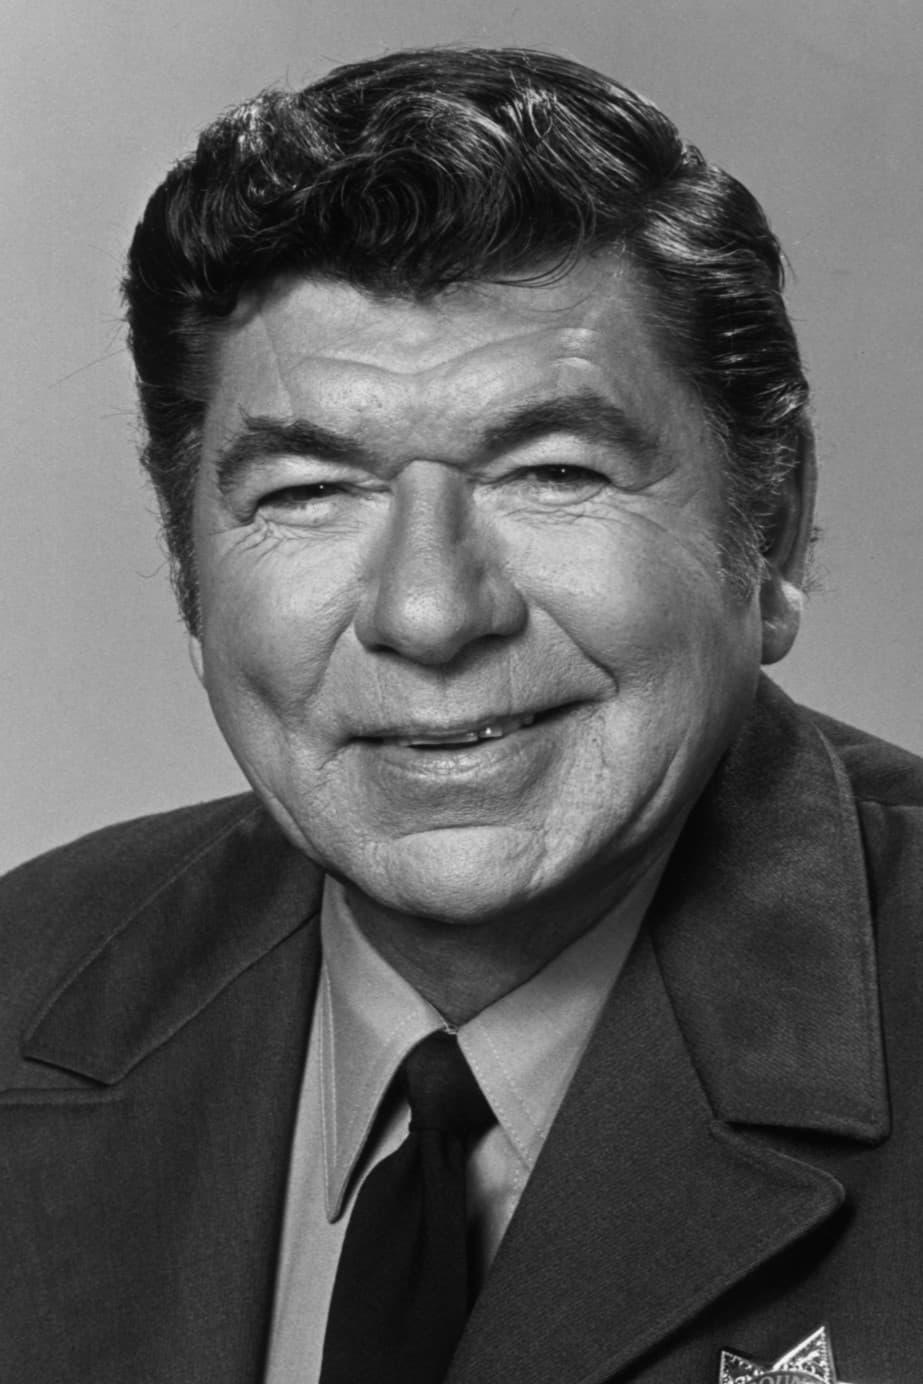 Claude Akins | Sgt. 'Baldy' Dhom (uncredited)